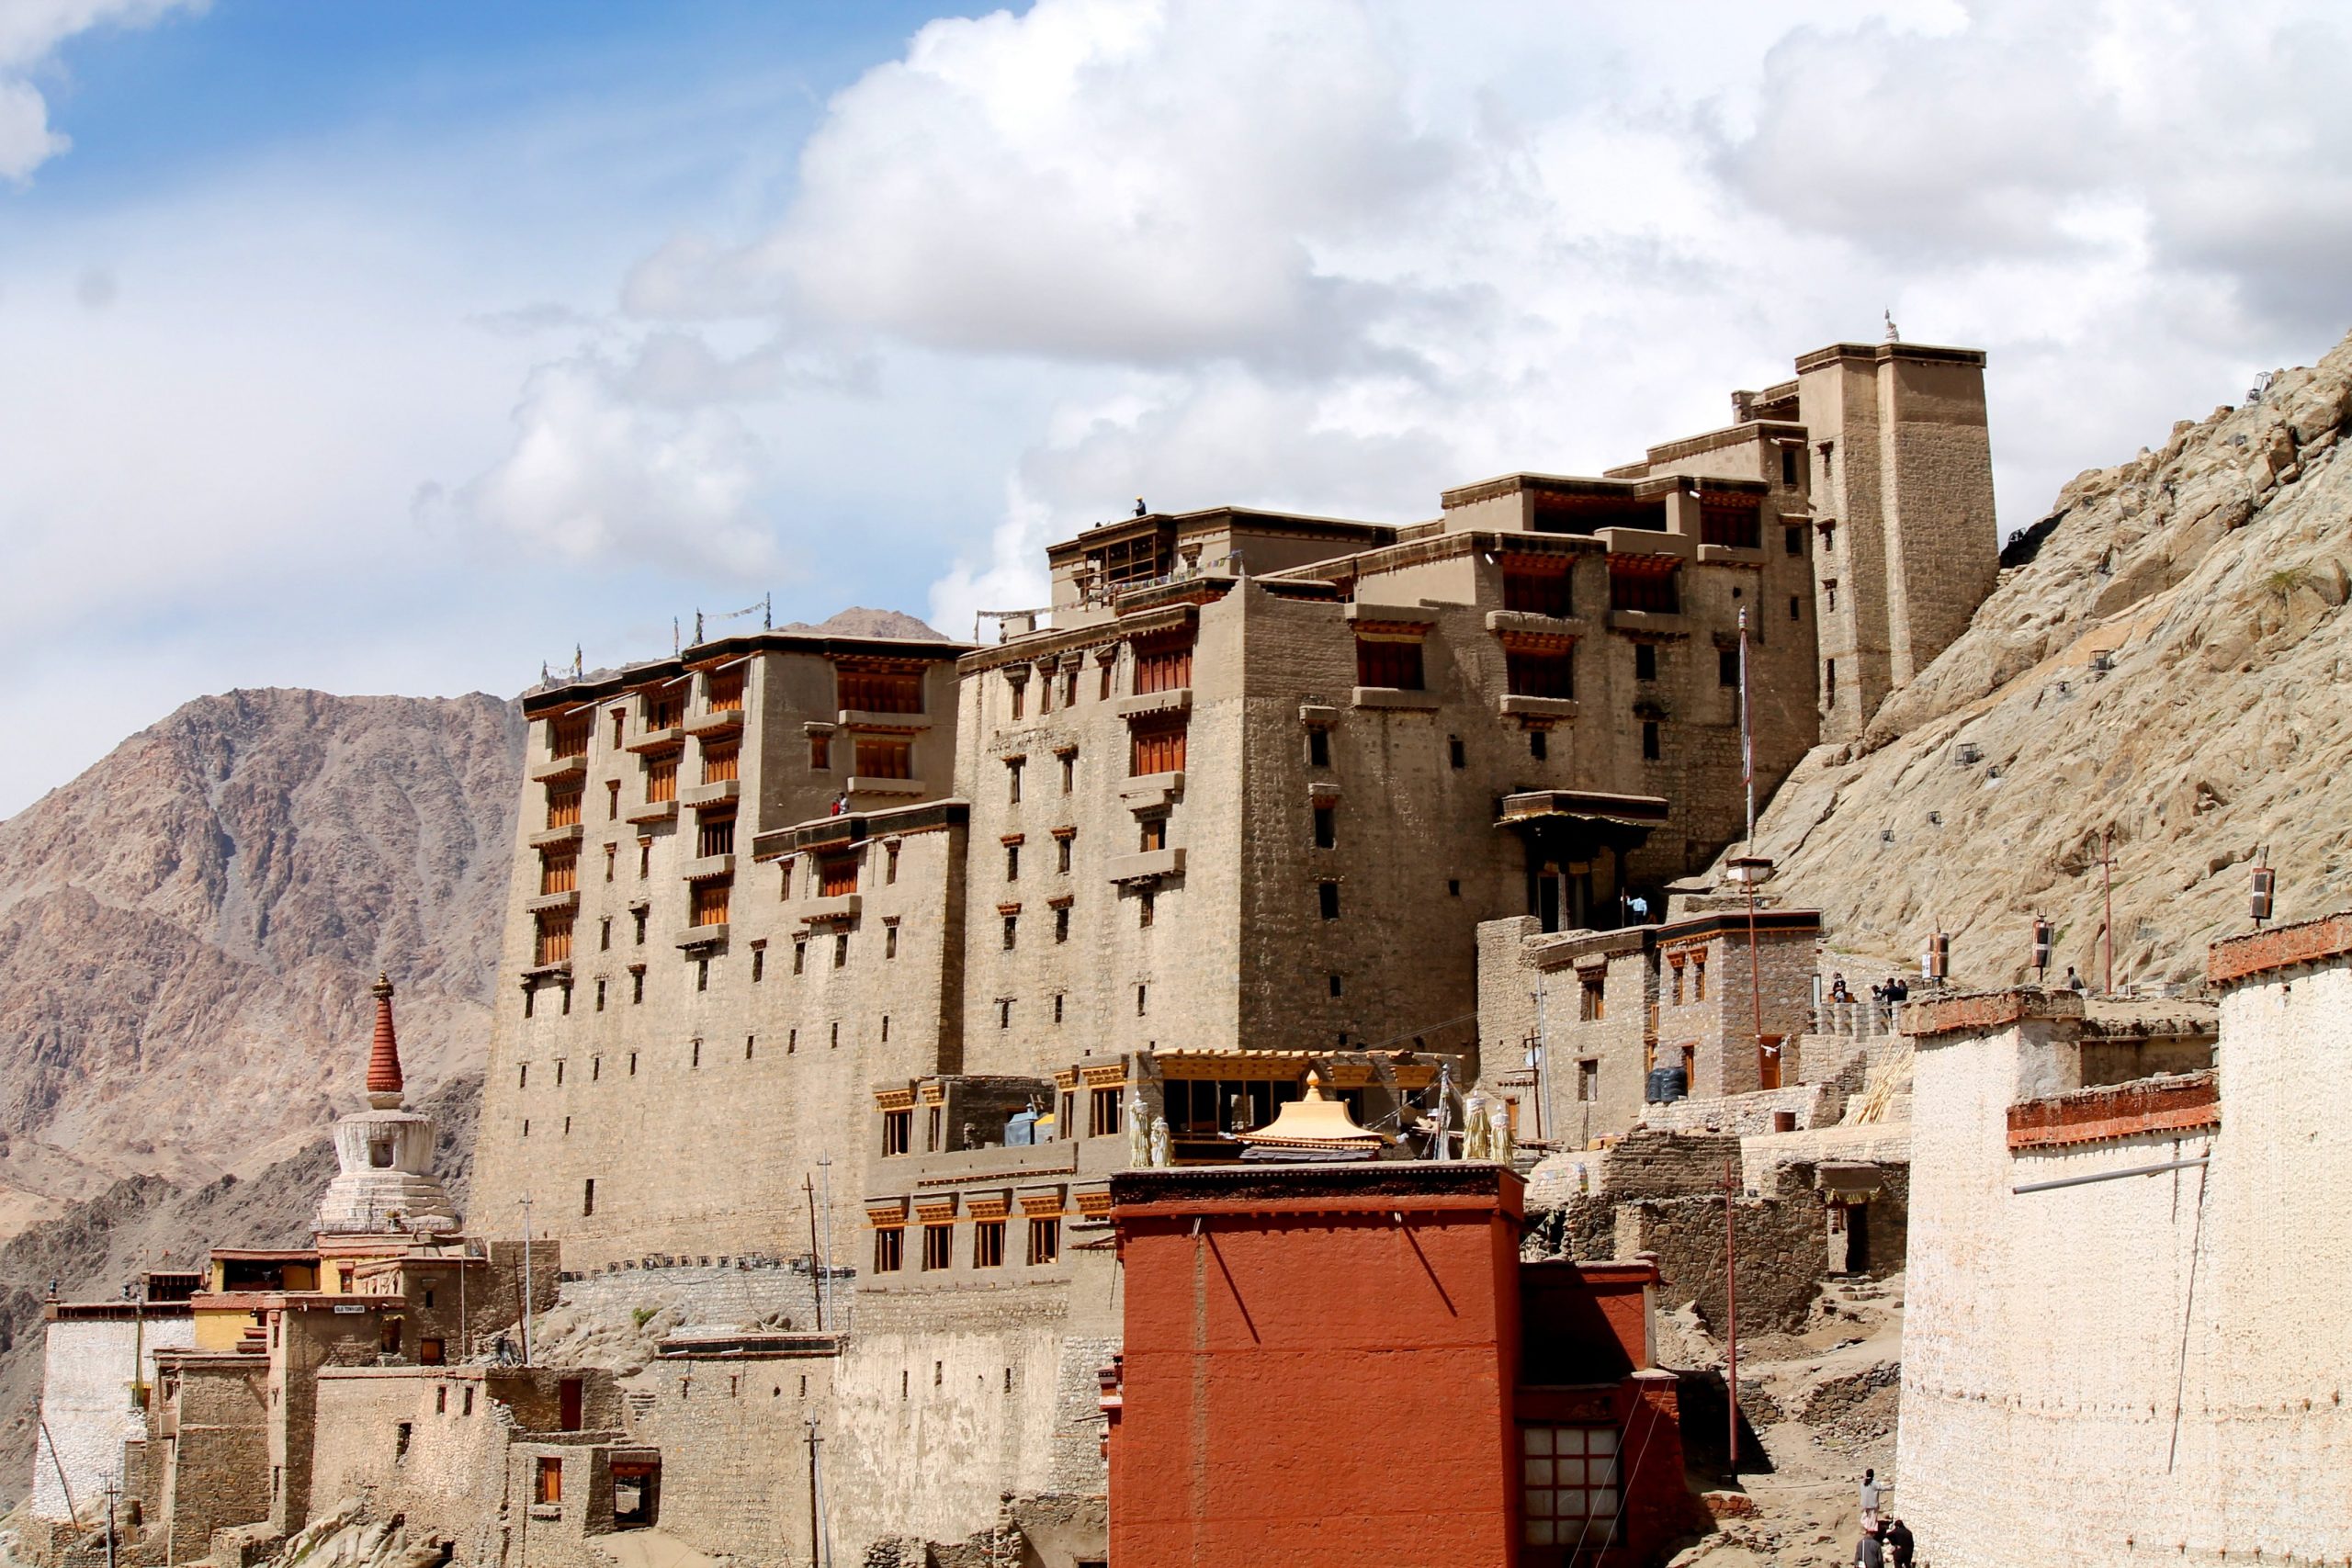 The Resilience of Rammed Earth at the Leh Palace